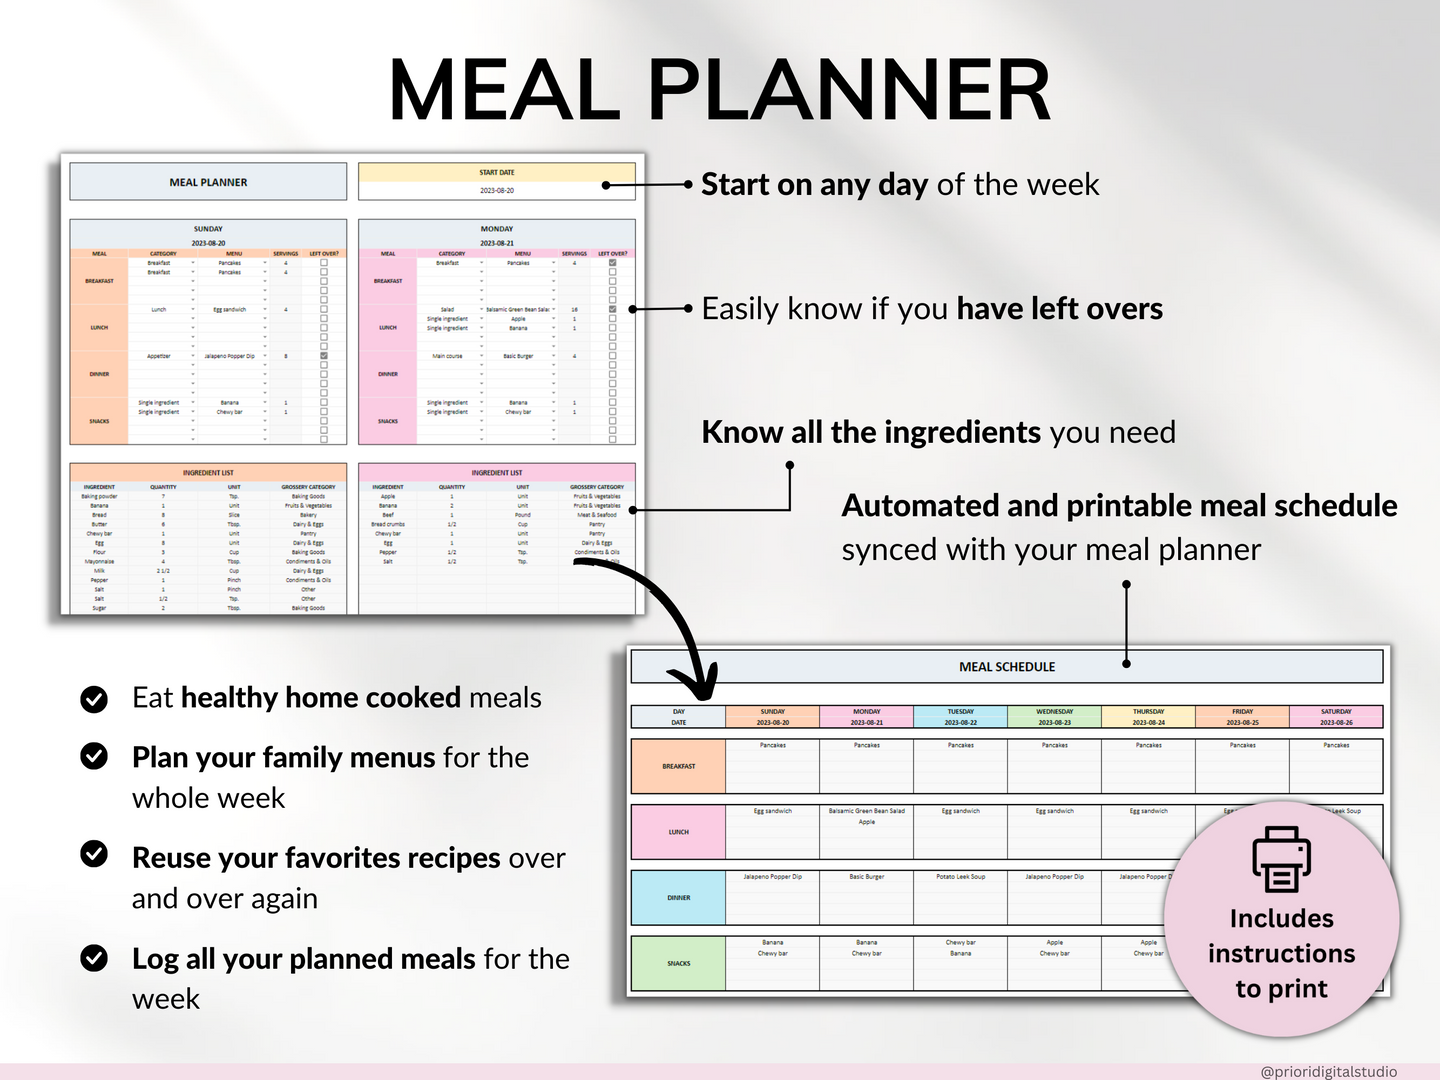 Family Annual Budget Weekly Meal Planner Habit Tracker To-Do List Monthly Budget Excel Spreadsheet Google Sheets Daily Habit Tracker Recipe